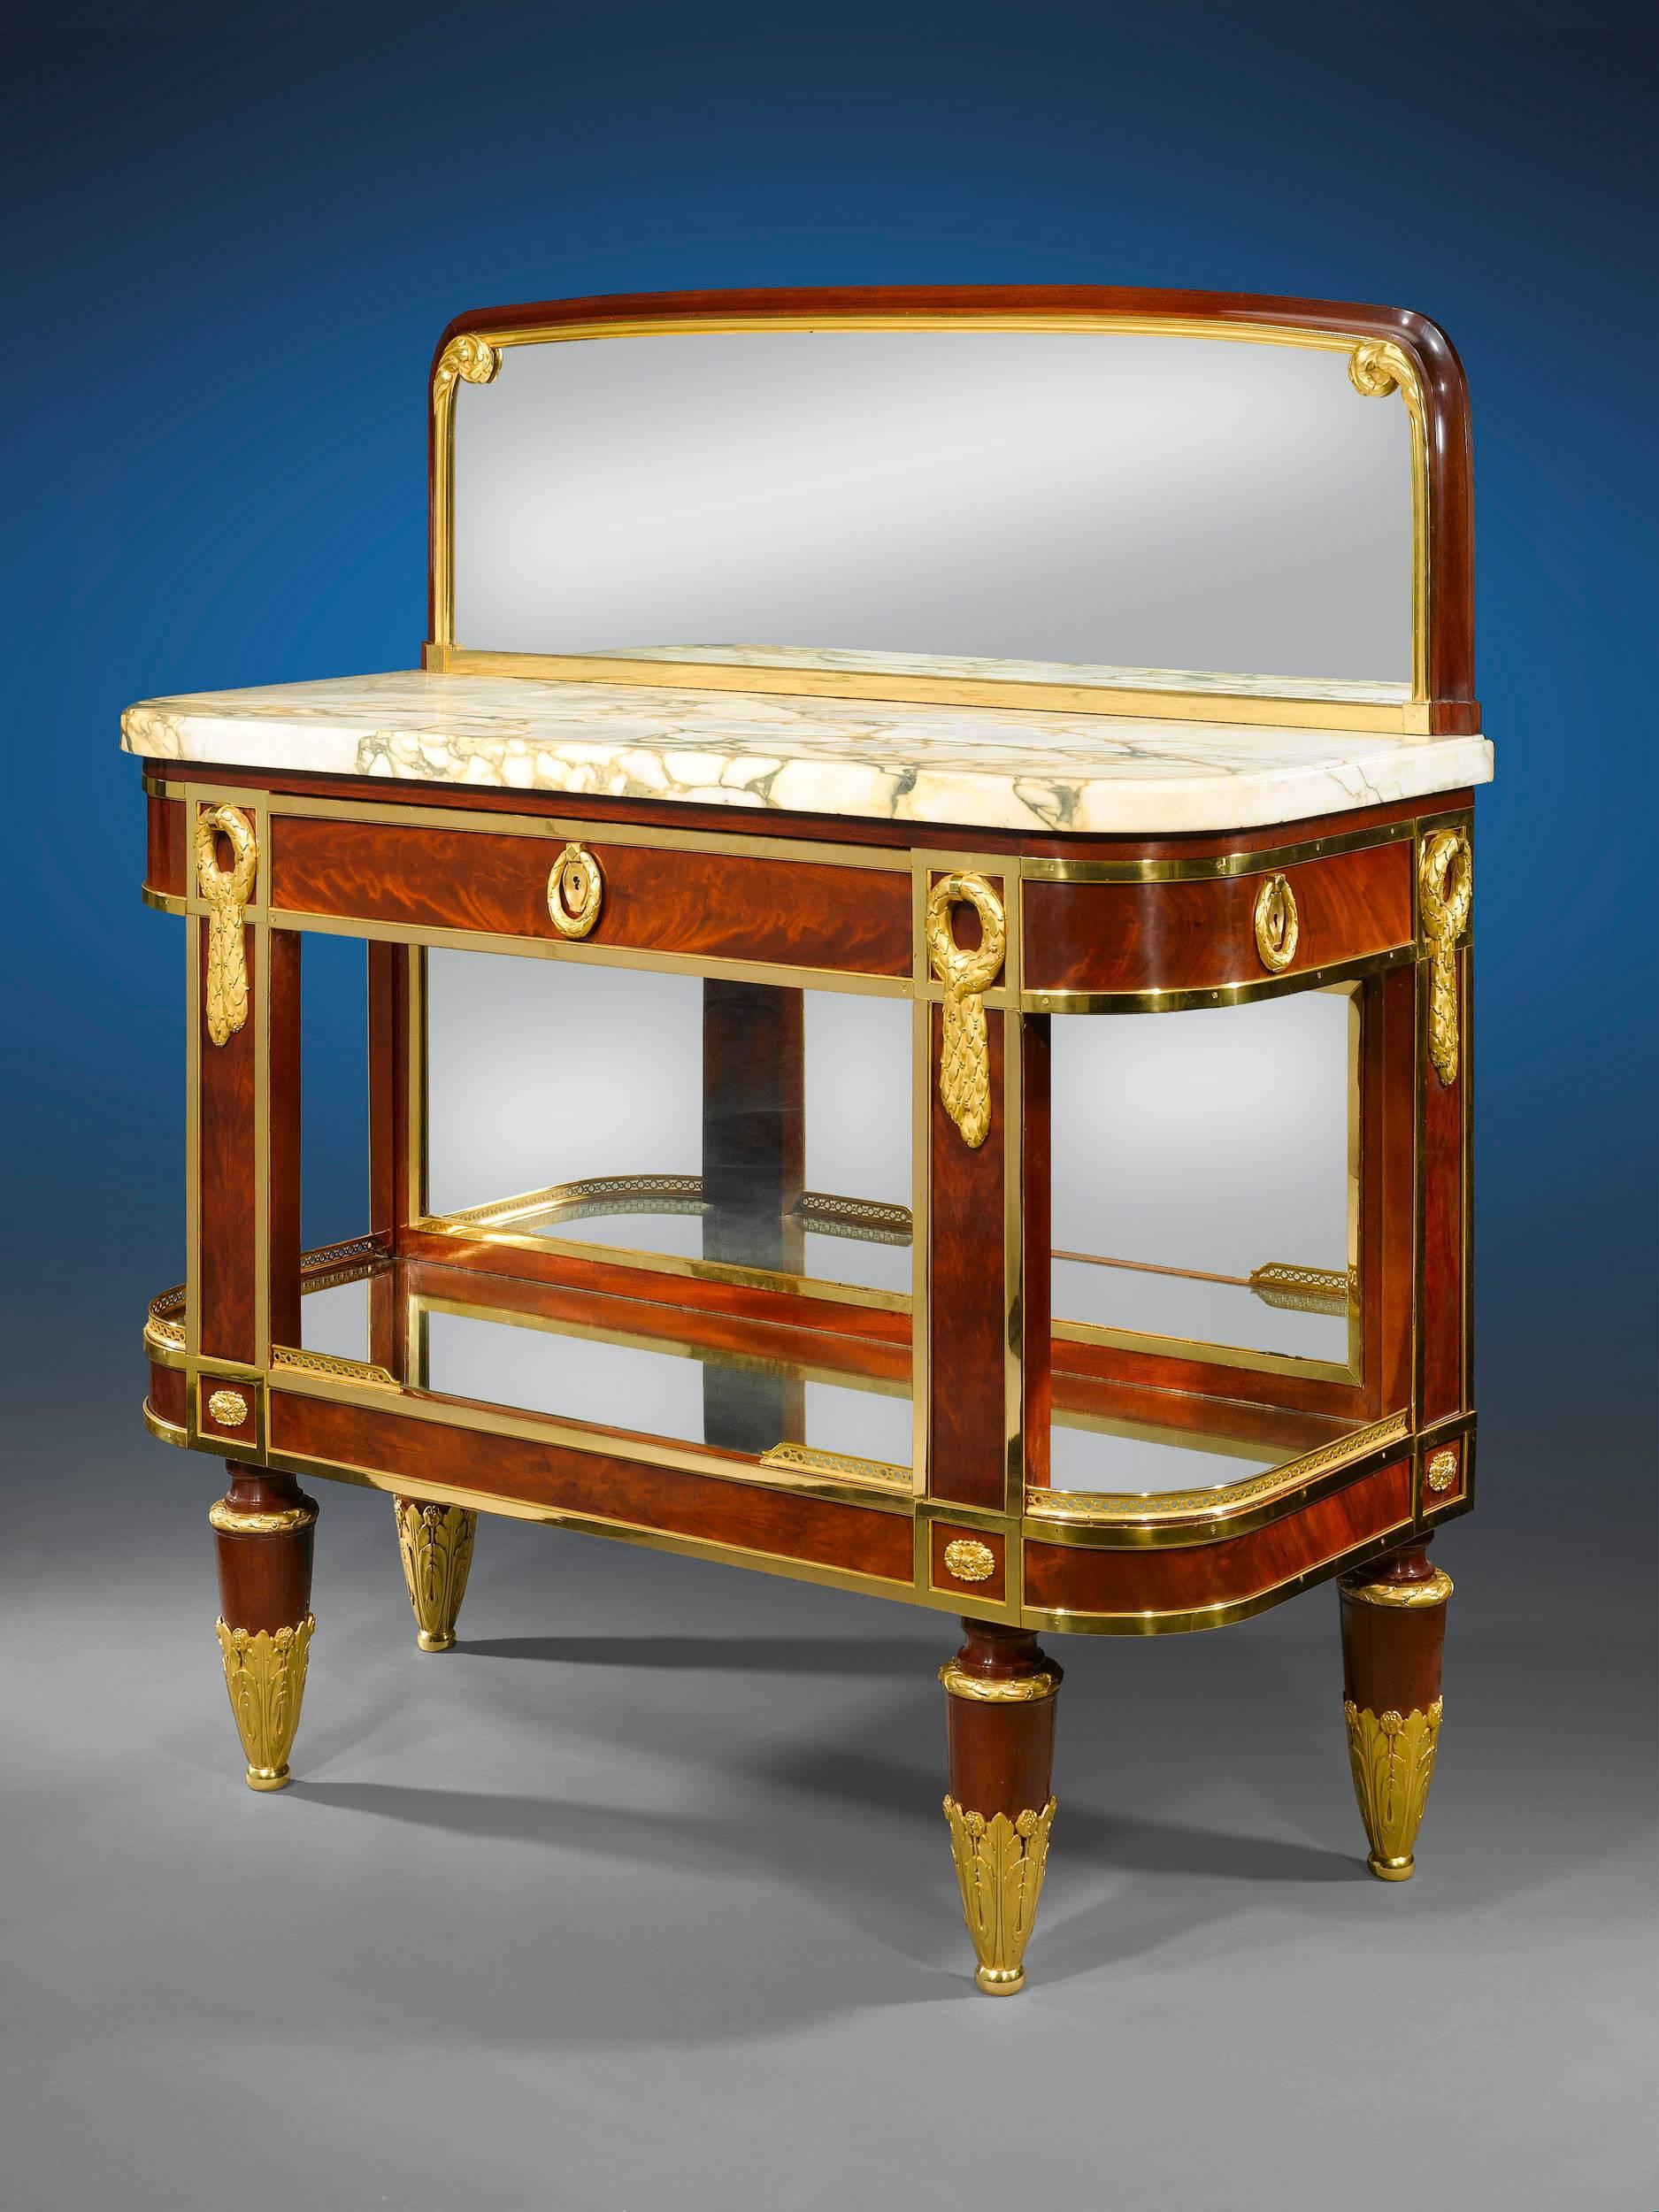 This magnificent French dining buffet cabinet captures the luxury of the Empire period in grand style. Crafted of exotic mahogany, the beautifully lacquered buffet features a fine marble top and mirrored backsplash. Intricately cast ormolu